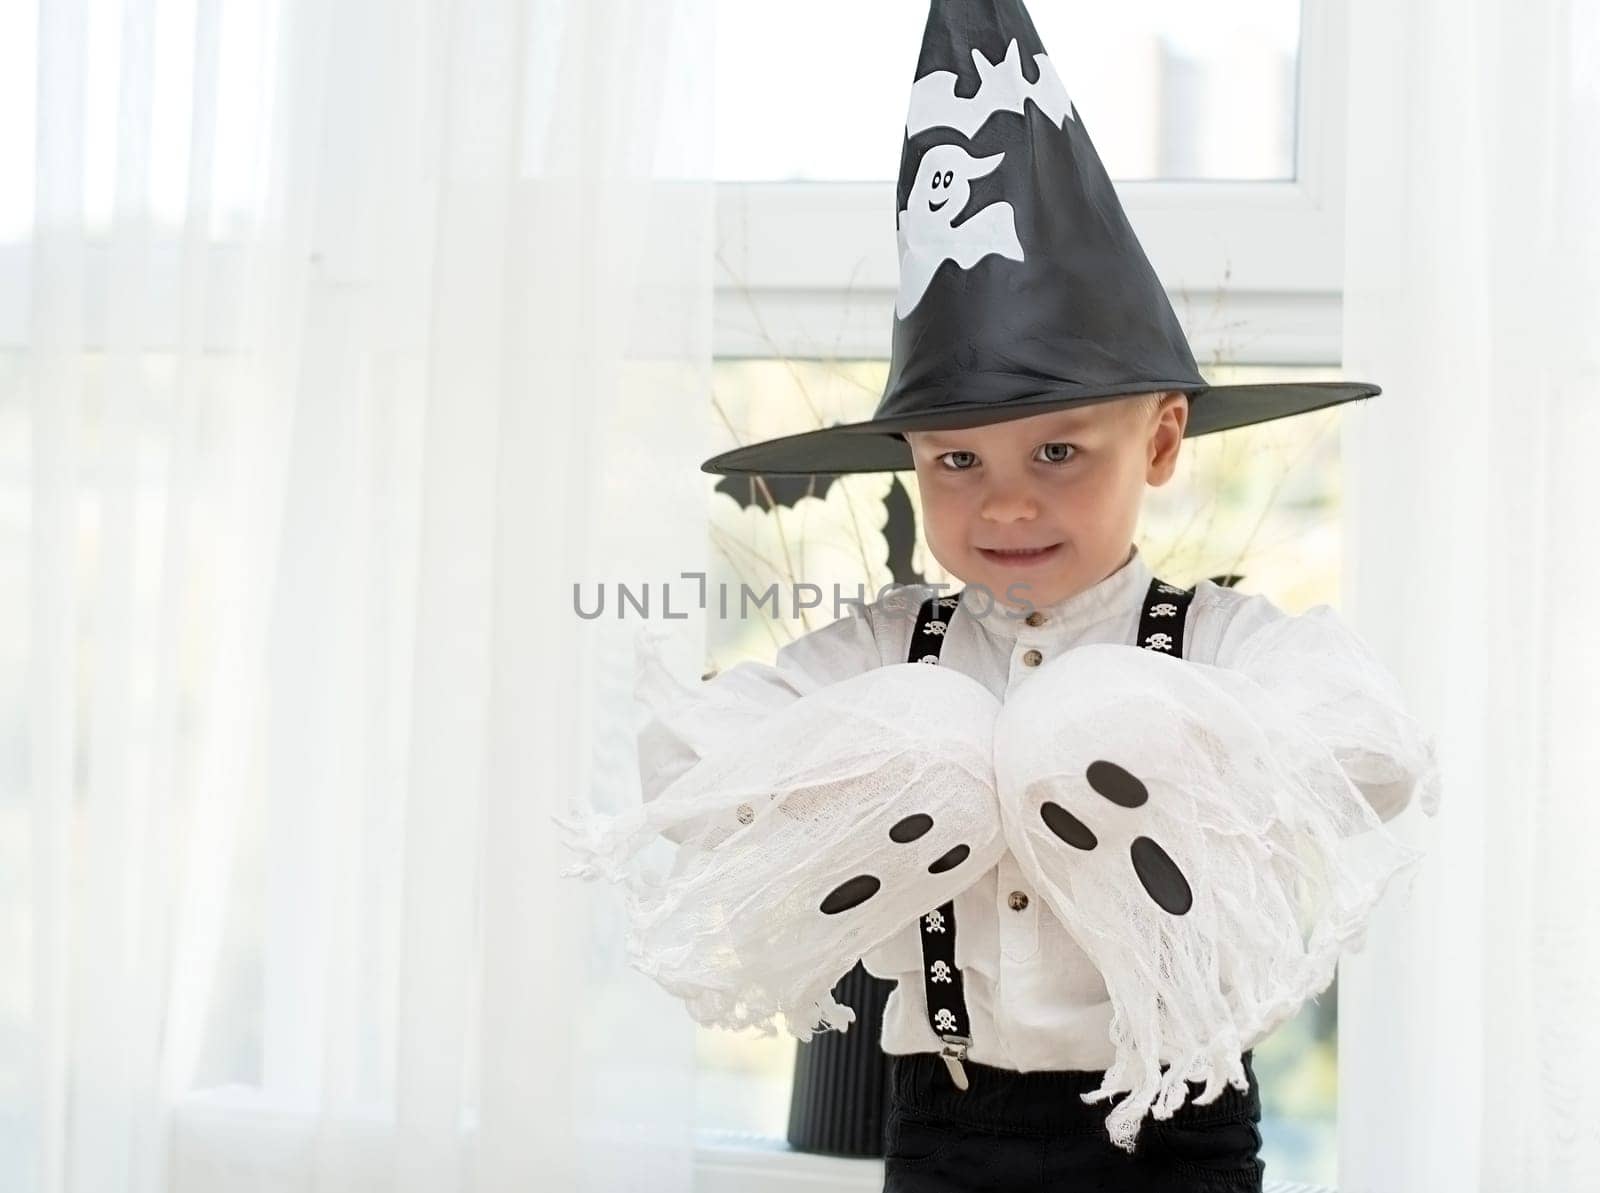 Halloween concept. A small handsome boy in a wizard's hat with white ghosts plays cheerfully and emotionally in a home interior against the background of a window. Close-up.